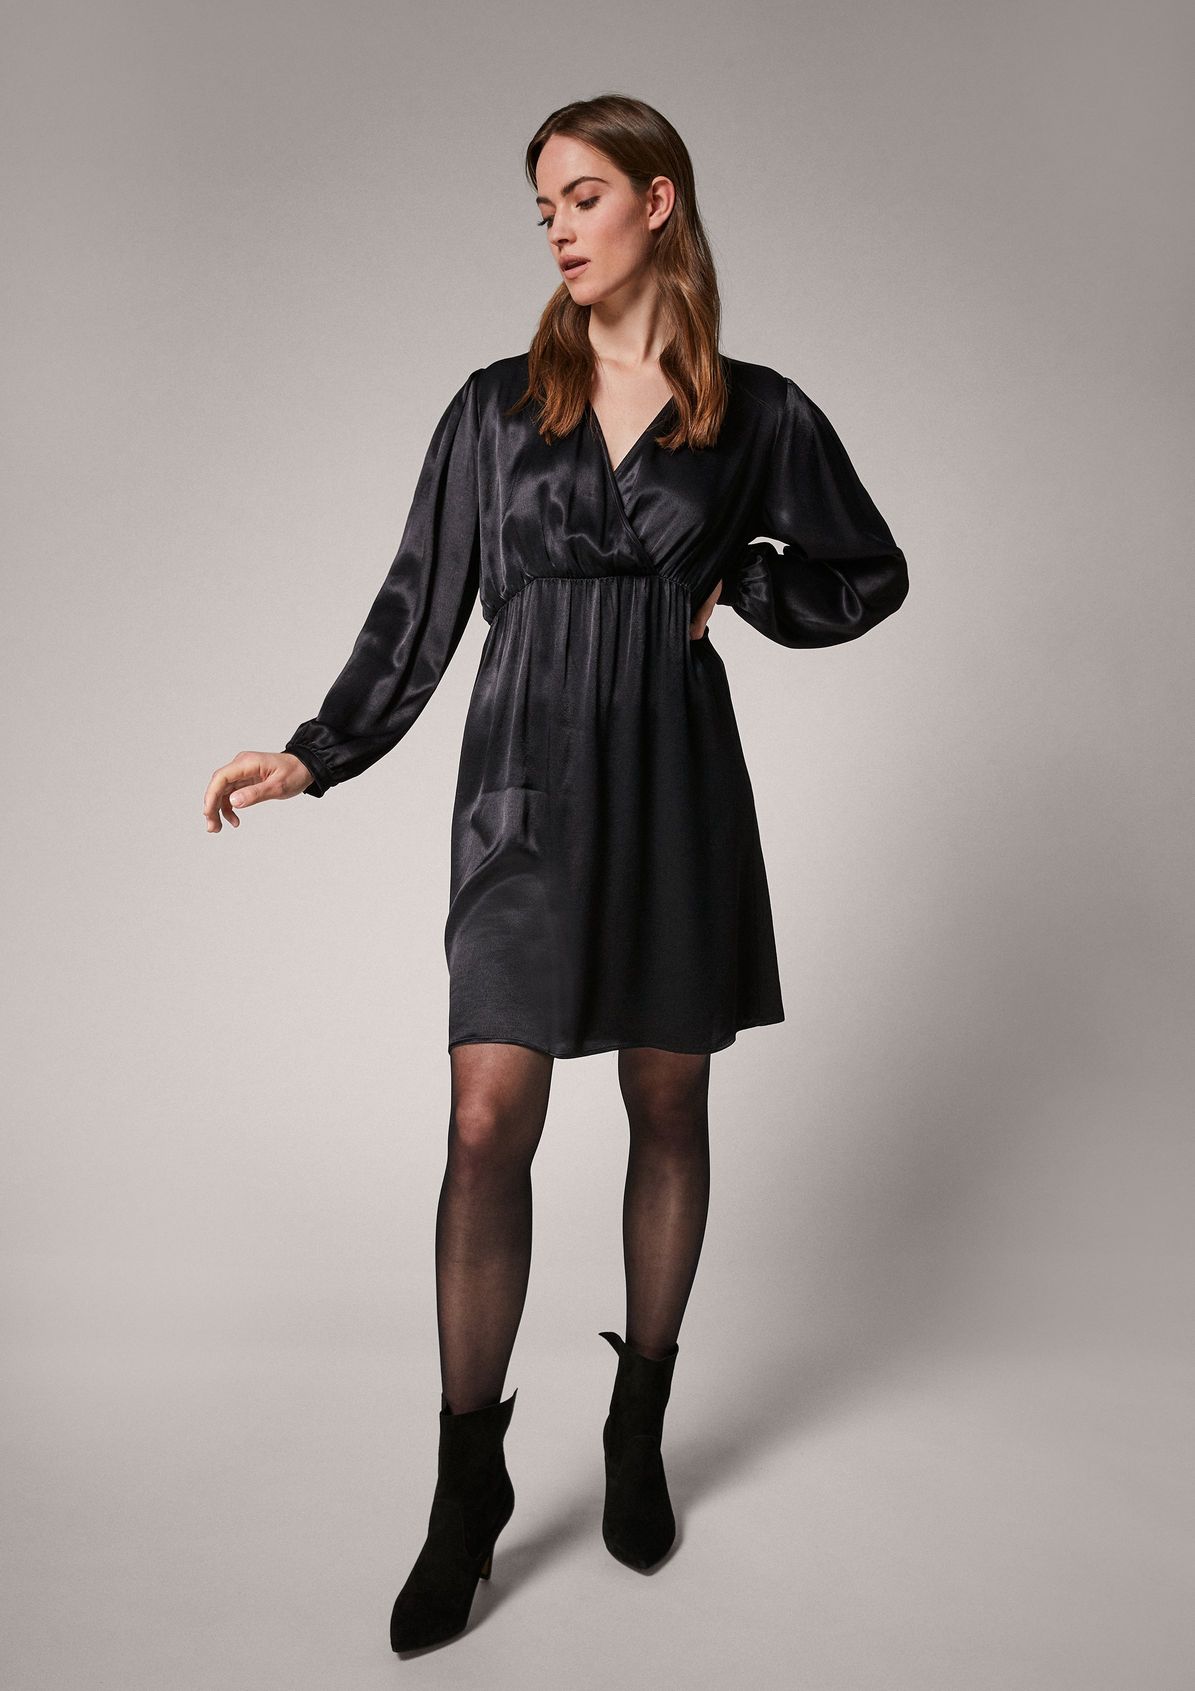 Dress with a cache coeur neckline from comma